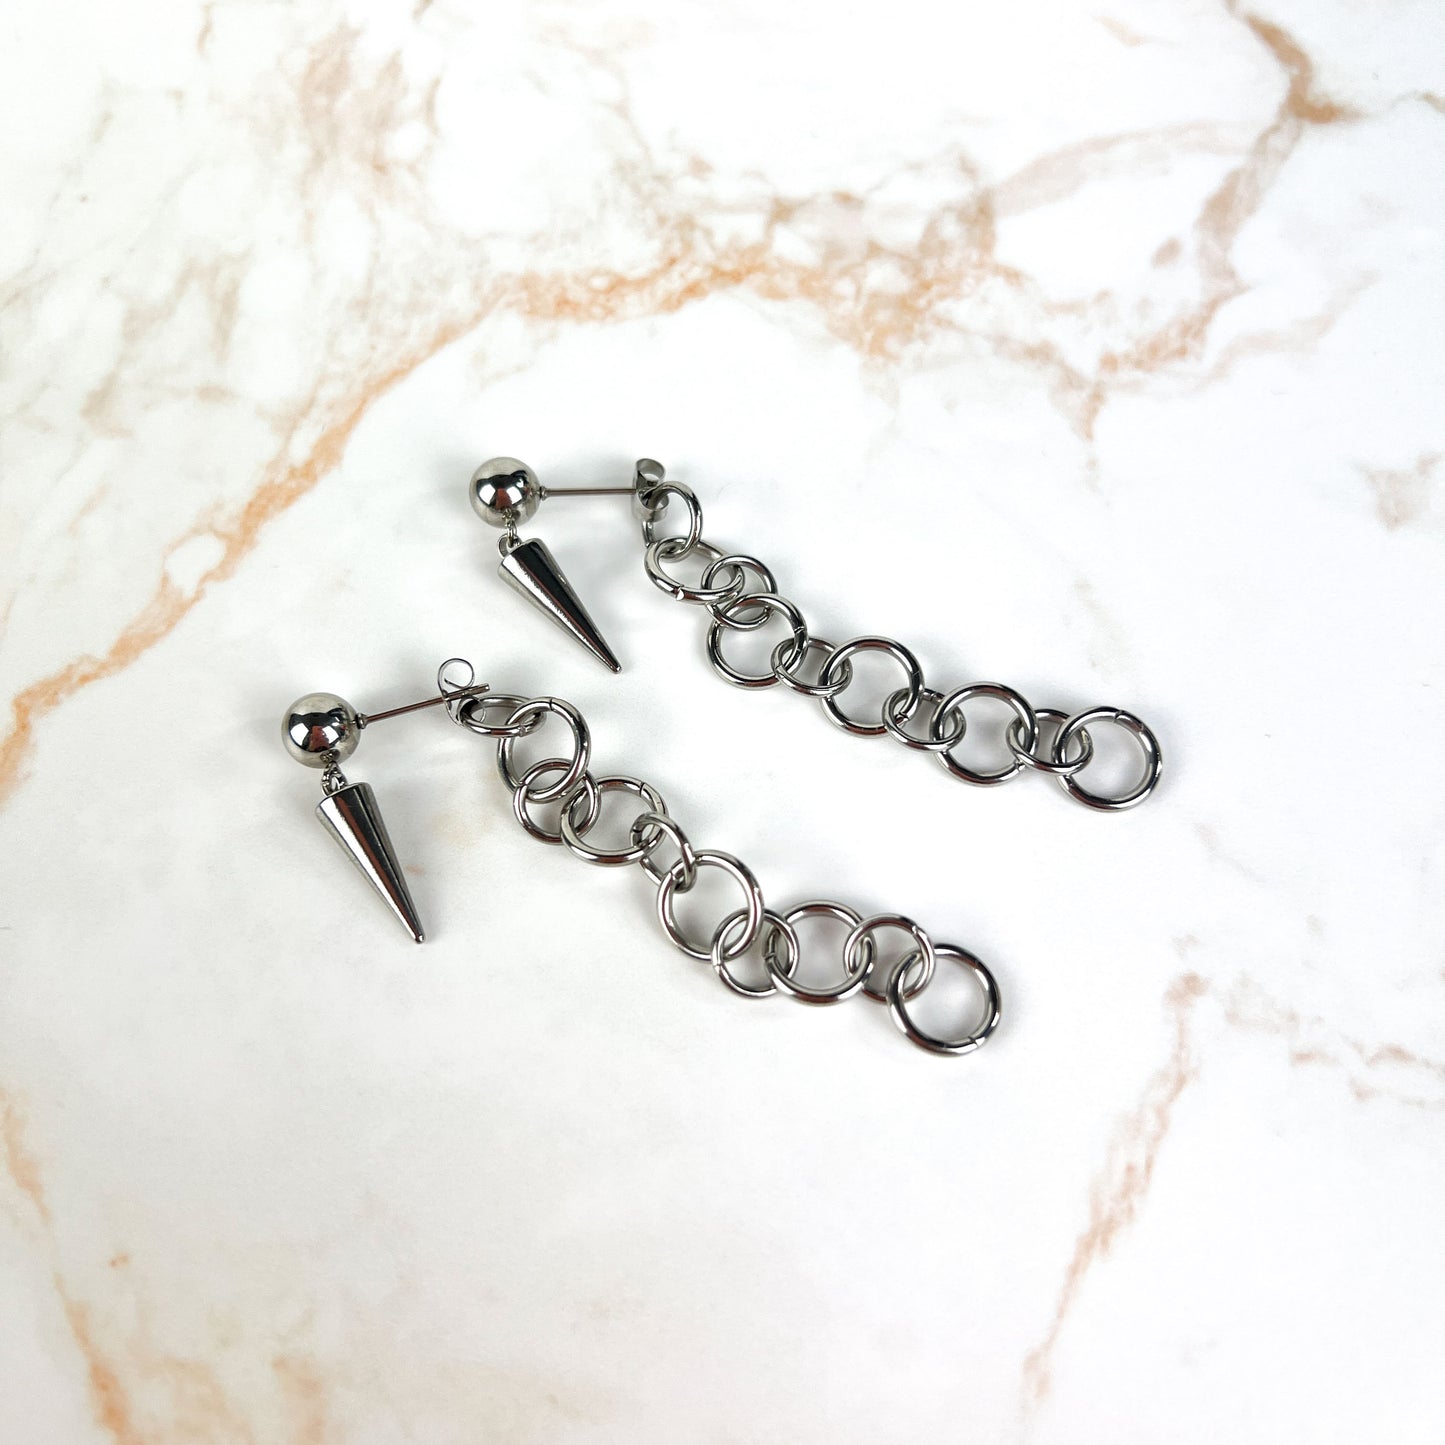 Spikes and back chunky chain stainless steel stud earrings